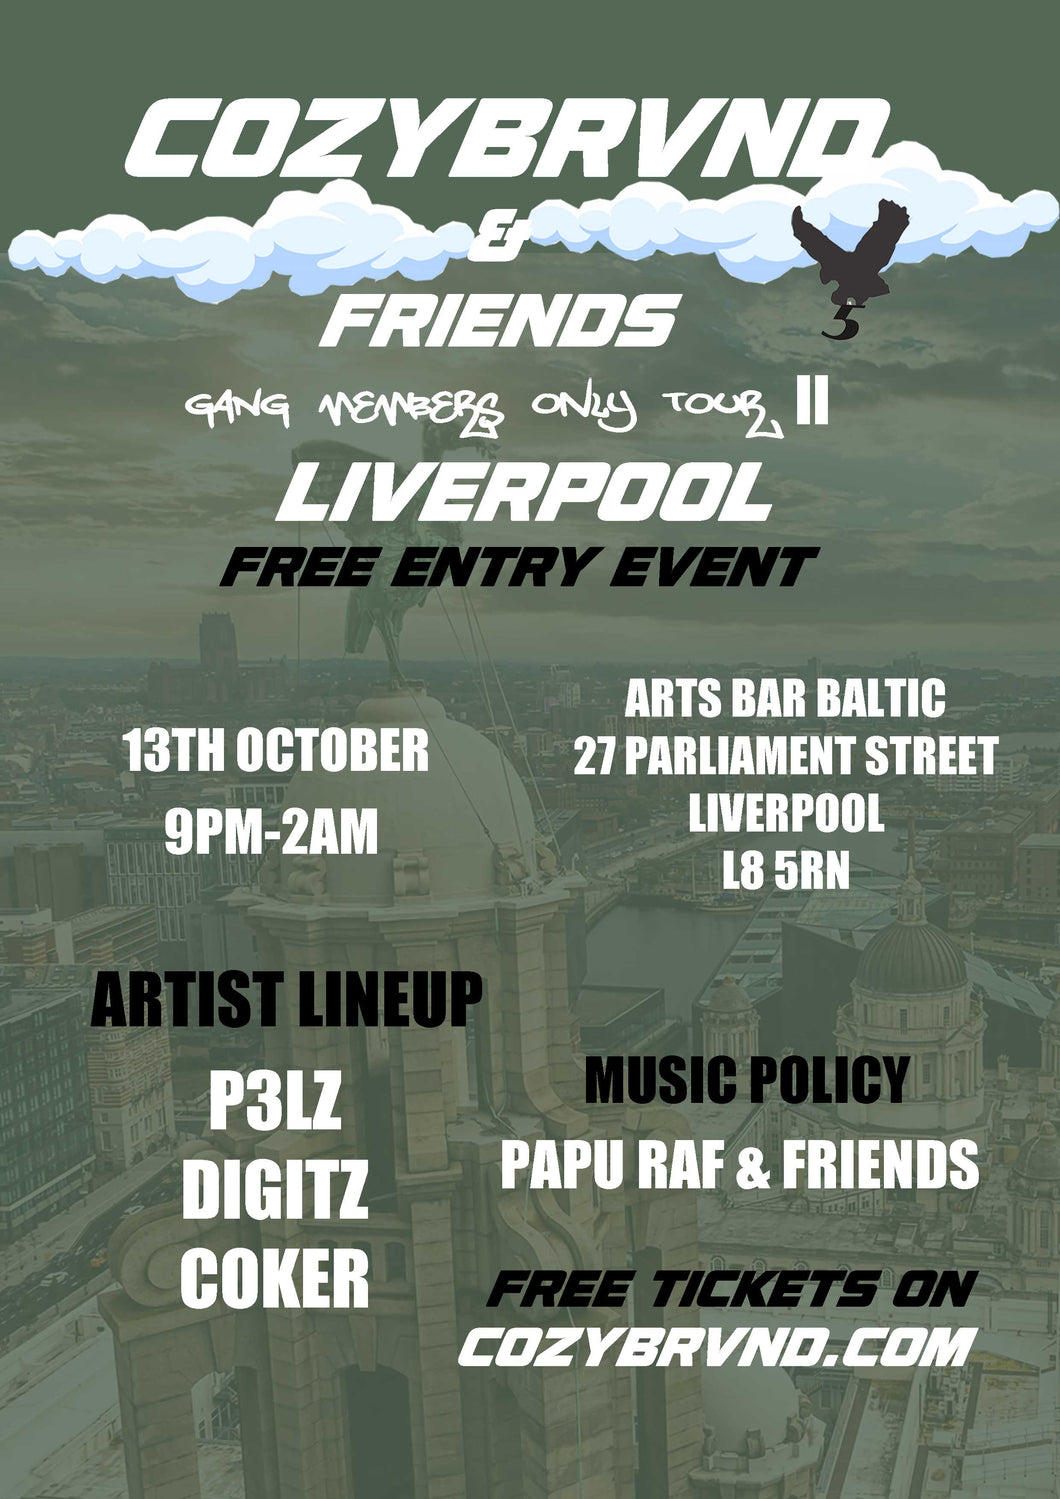 COZYBRVND & FRIENDS LIVERPOOL FREE ENTRY TICKET